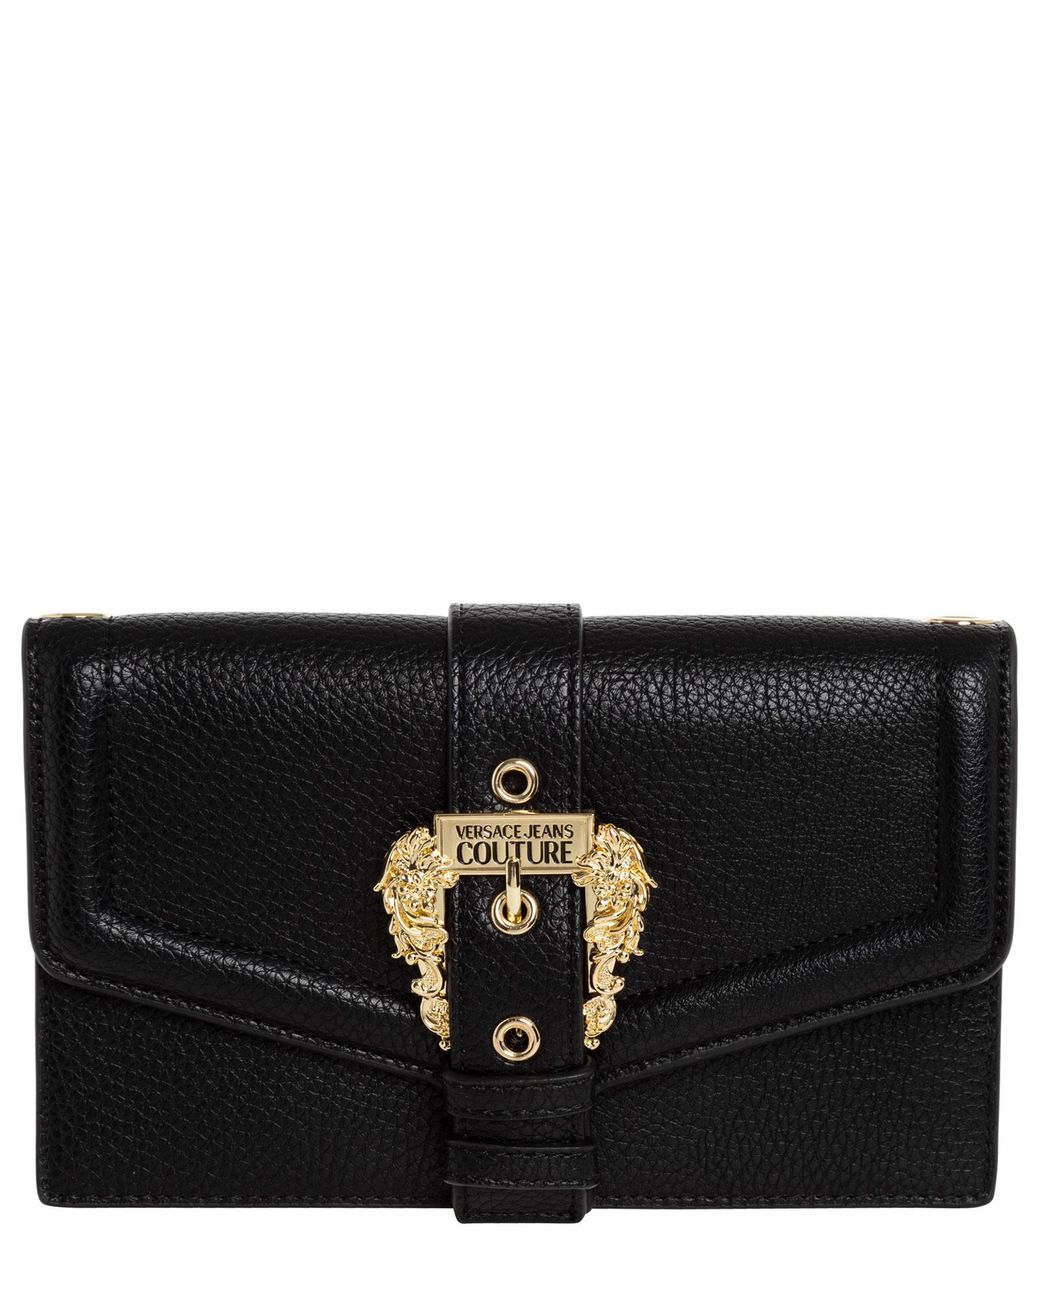 Versace Jeans Couture Couture I Clutch in Black | Lyst